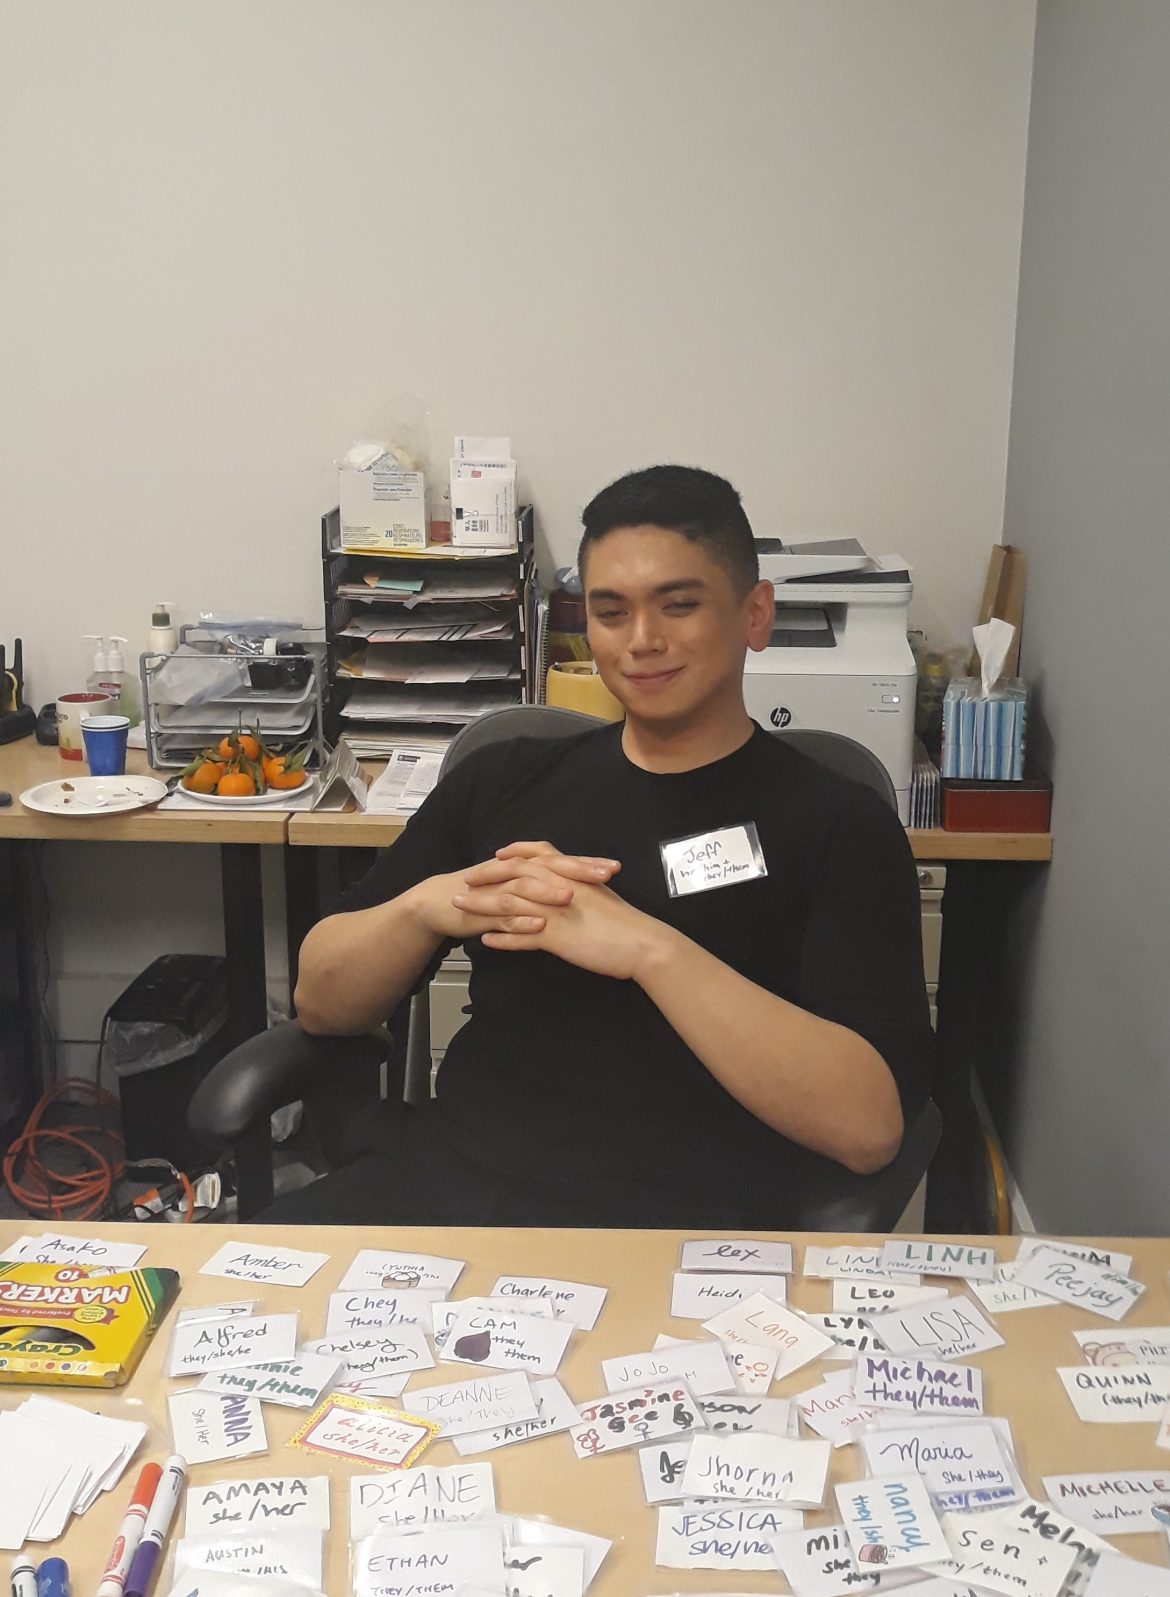 Image description: Jeff is sitting behind a desk indoors, smiling with hands folded in front of them. There are reusable name tags in front of them.